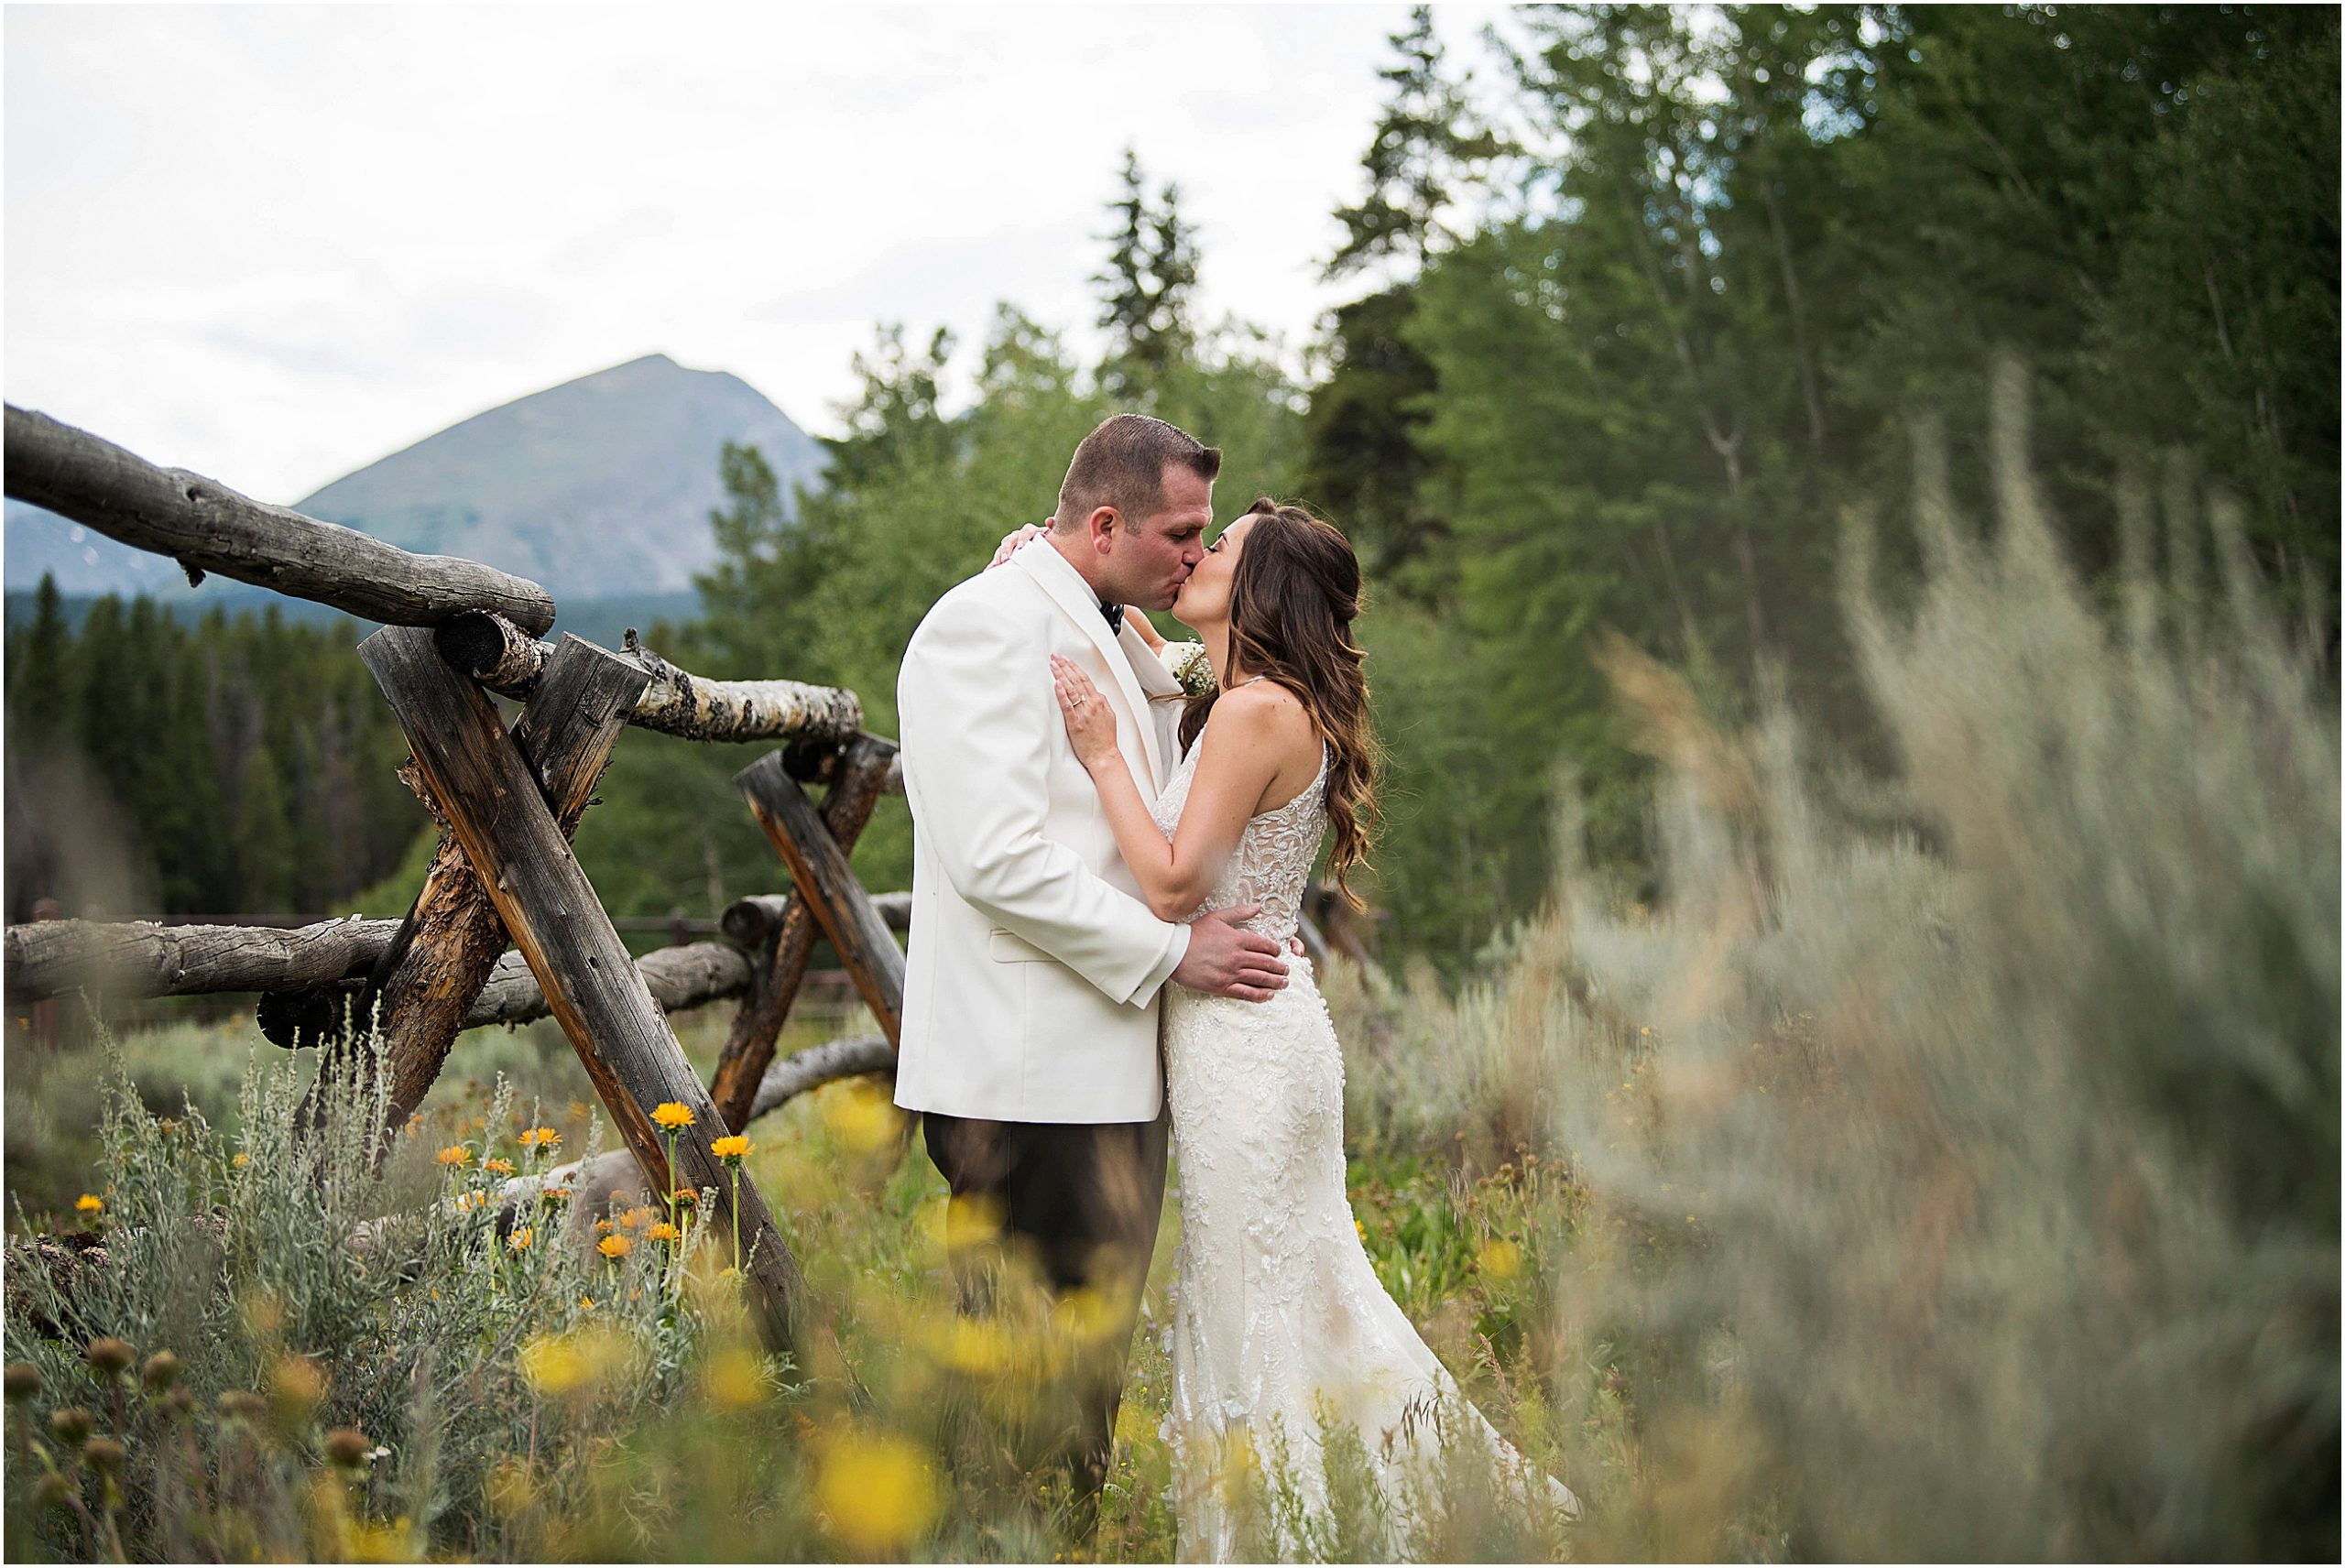 Bride and groom stand embracing and kissing with mountain views in Breckenridge surrounded by yellow wildflowers